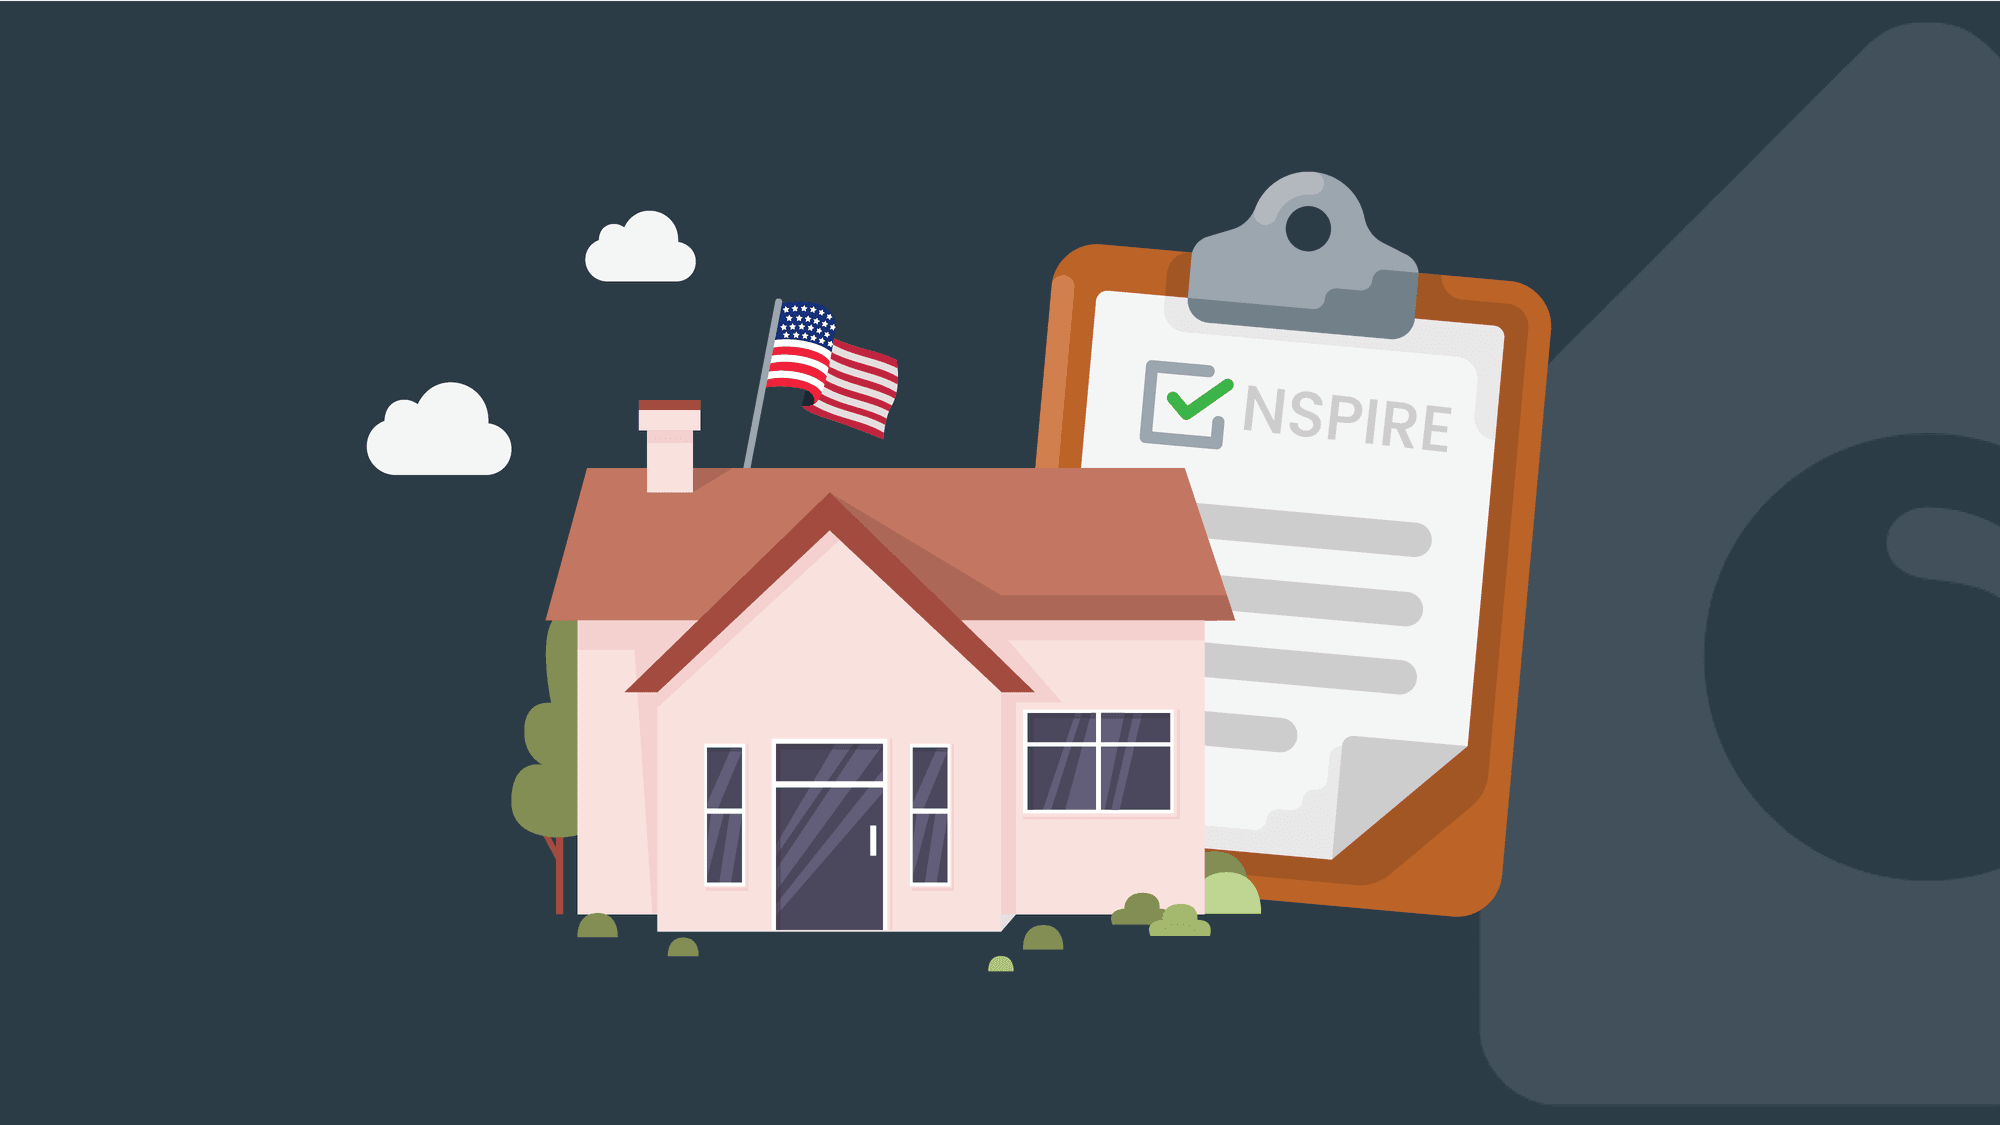 How Will HUD Improve the Quality of US Affordable Housing with NSPIRE?